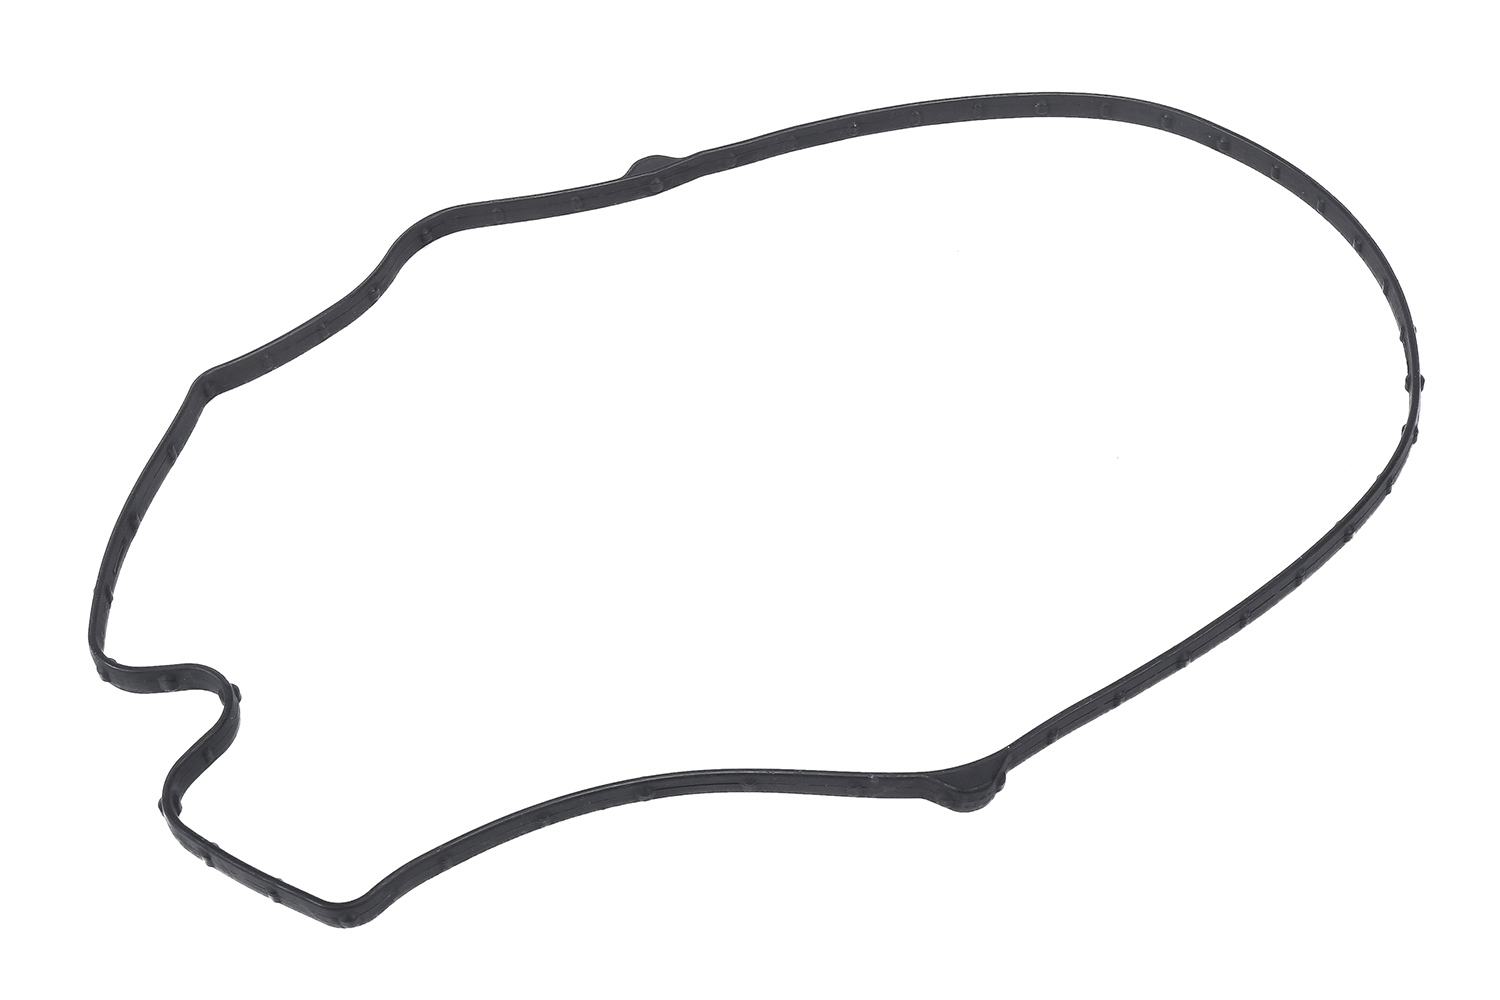 GM GENUINE PARTS - Engine Timing Cover Gasket - GMP 55506816